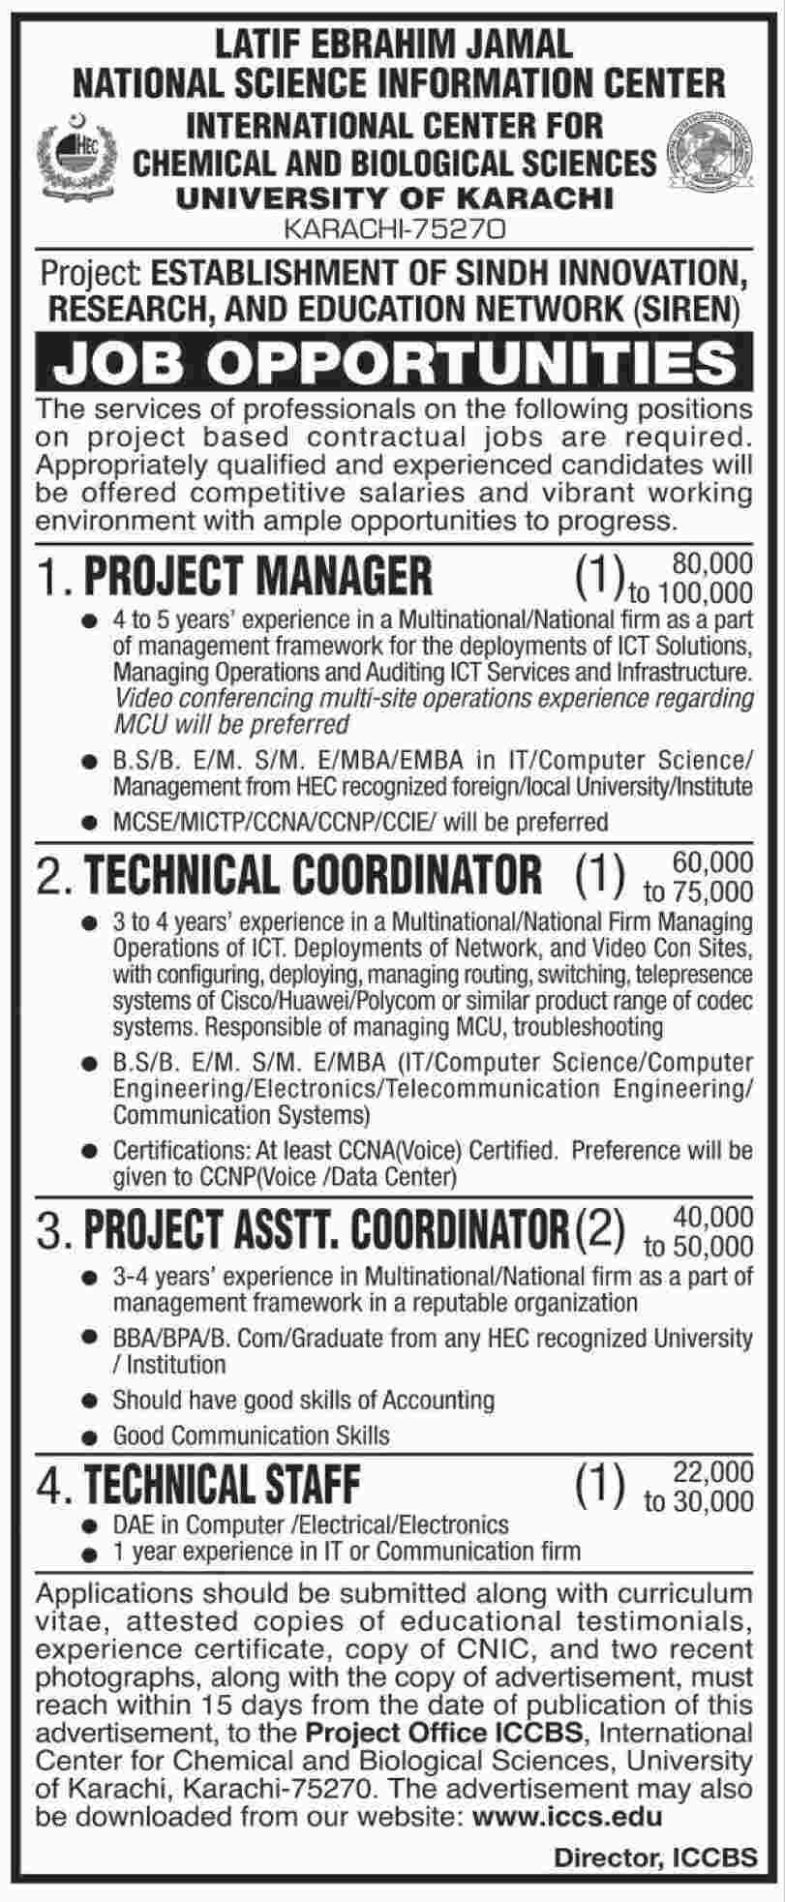 University of Karachi (UOK) Jobs 2019 for DAE, IT/Telecom, Coordinators and Project Manager